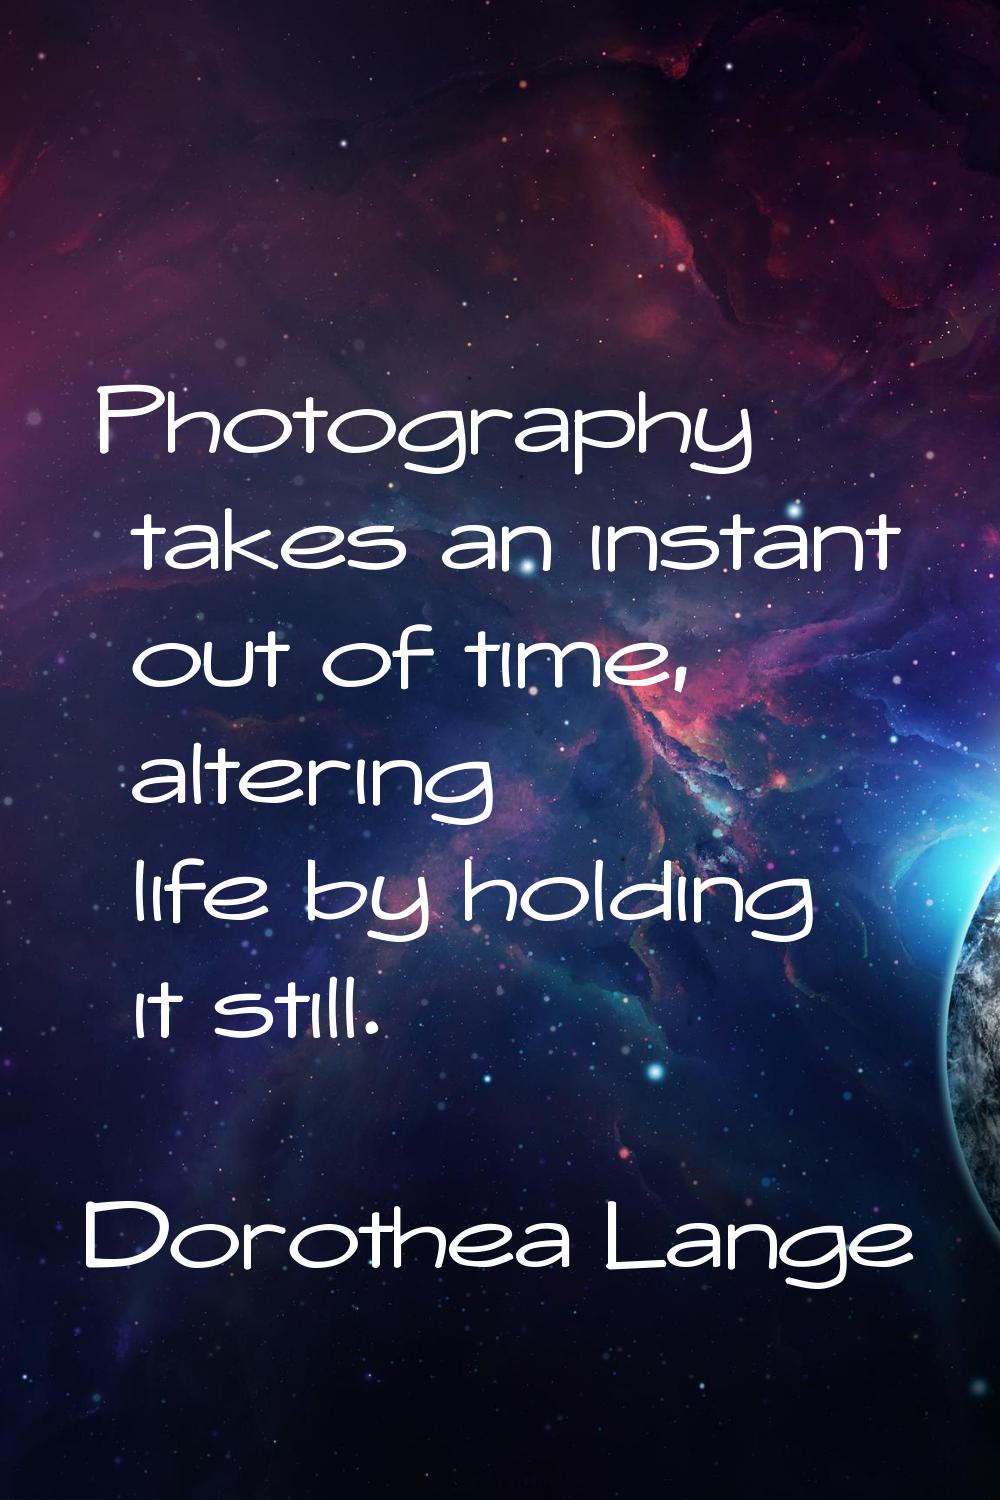 Photography takes an instant out of time, altering life by holding it still.